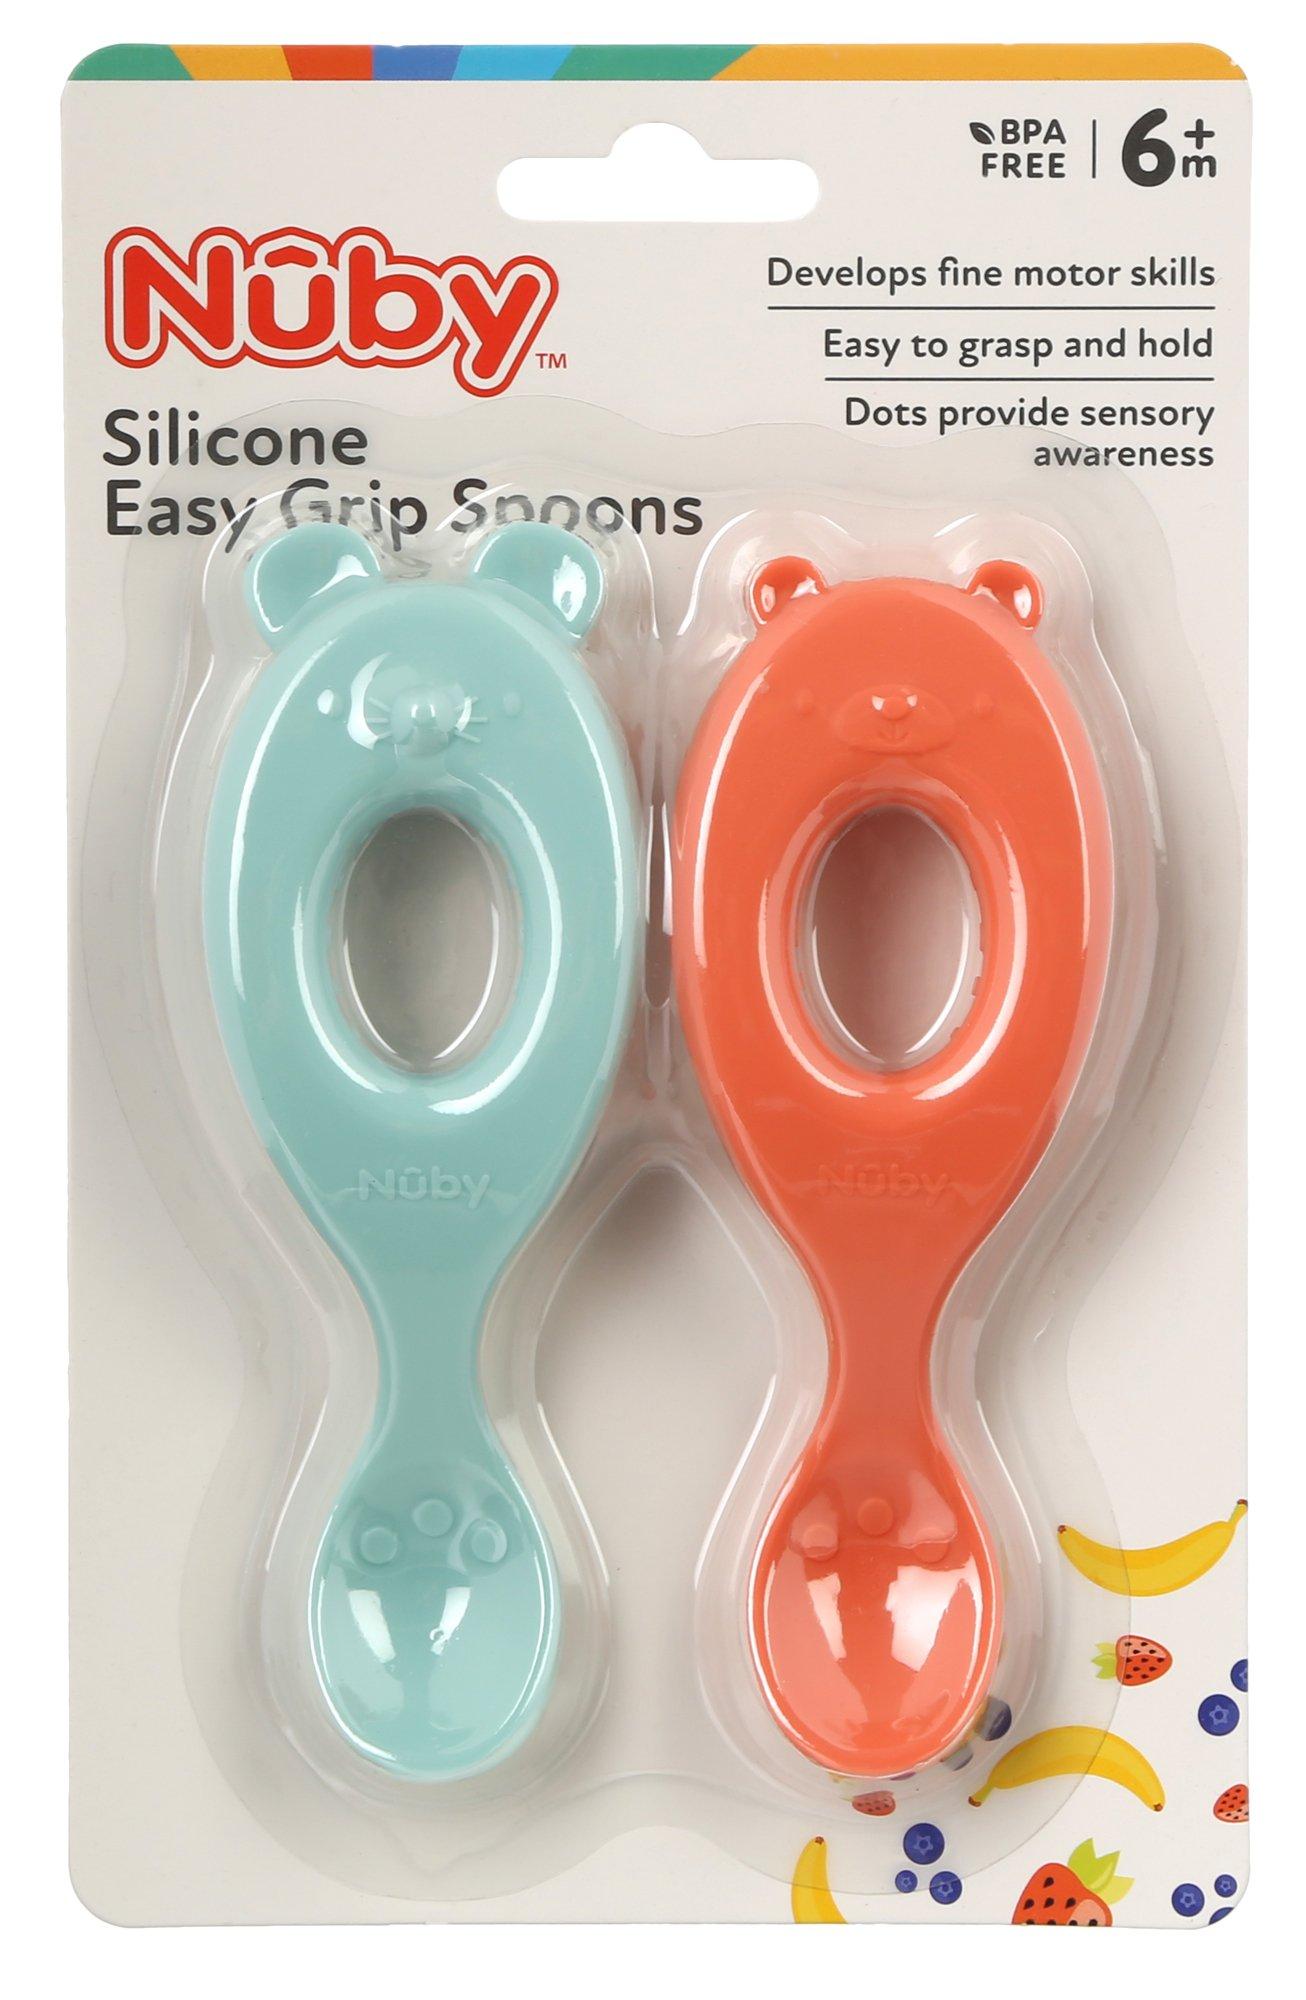 Nuby 2 pc. Silicone Easy Grip Spoons Set